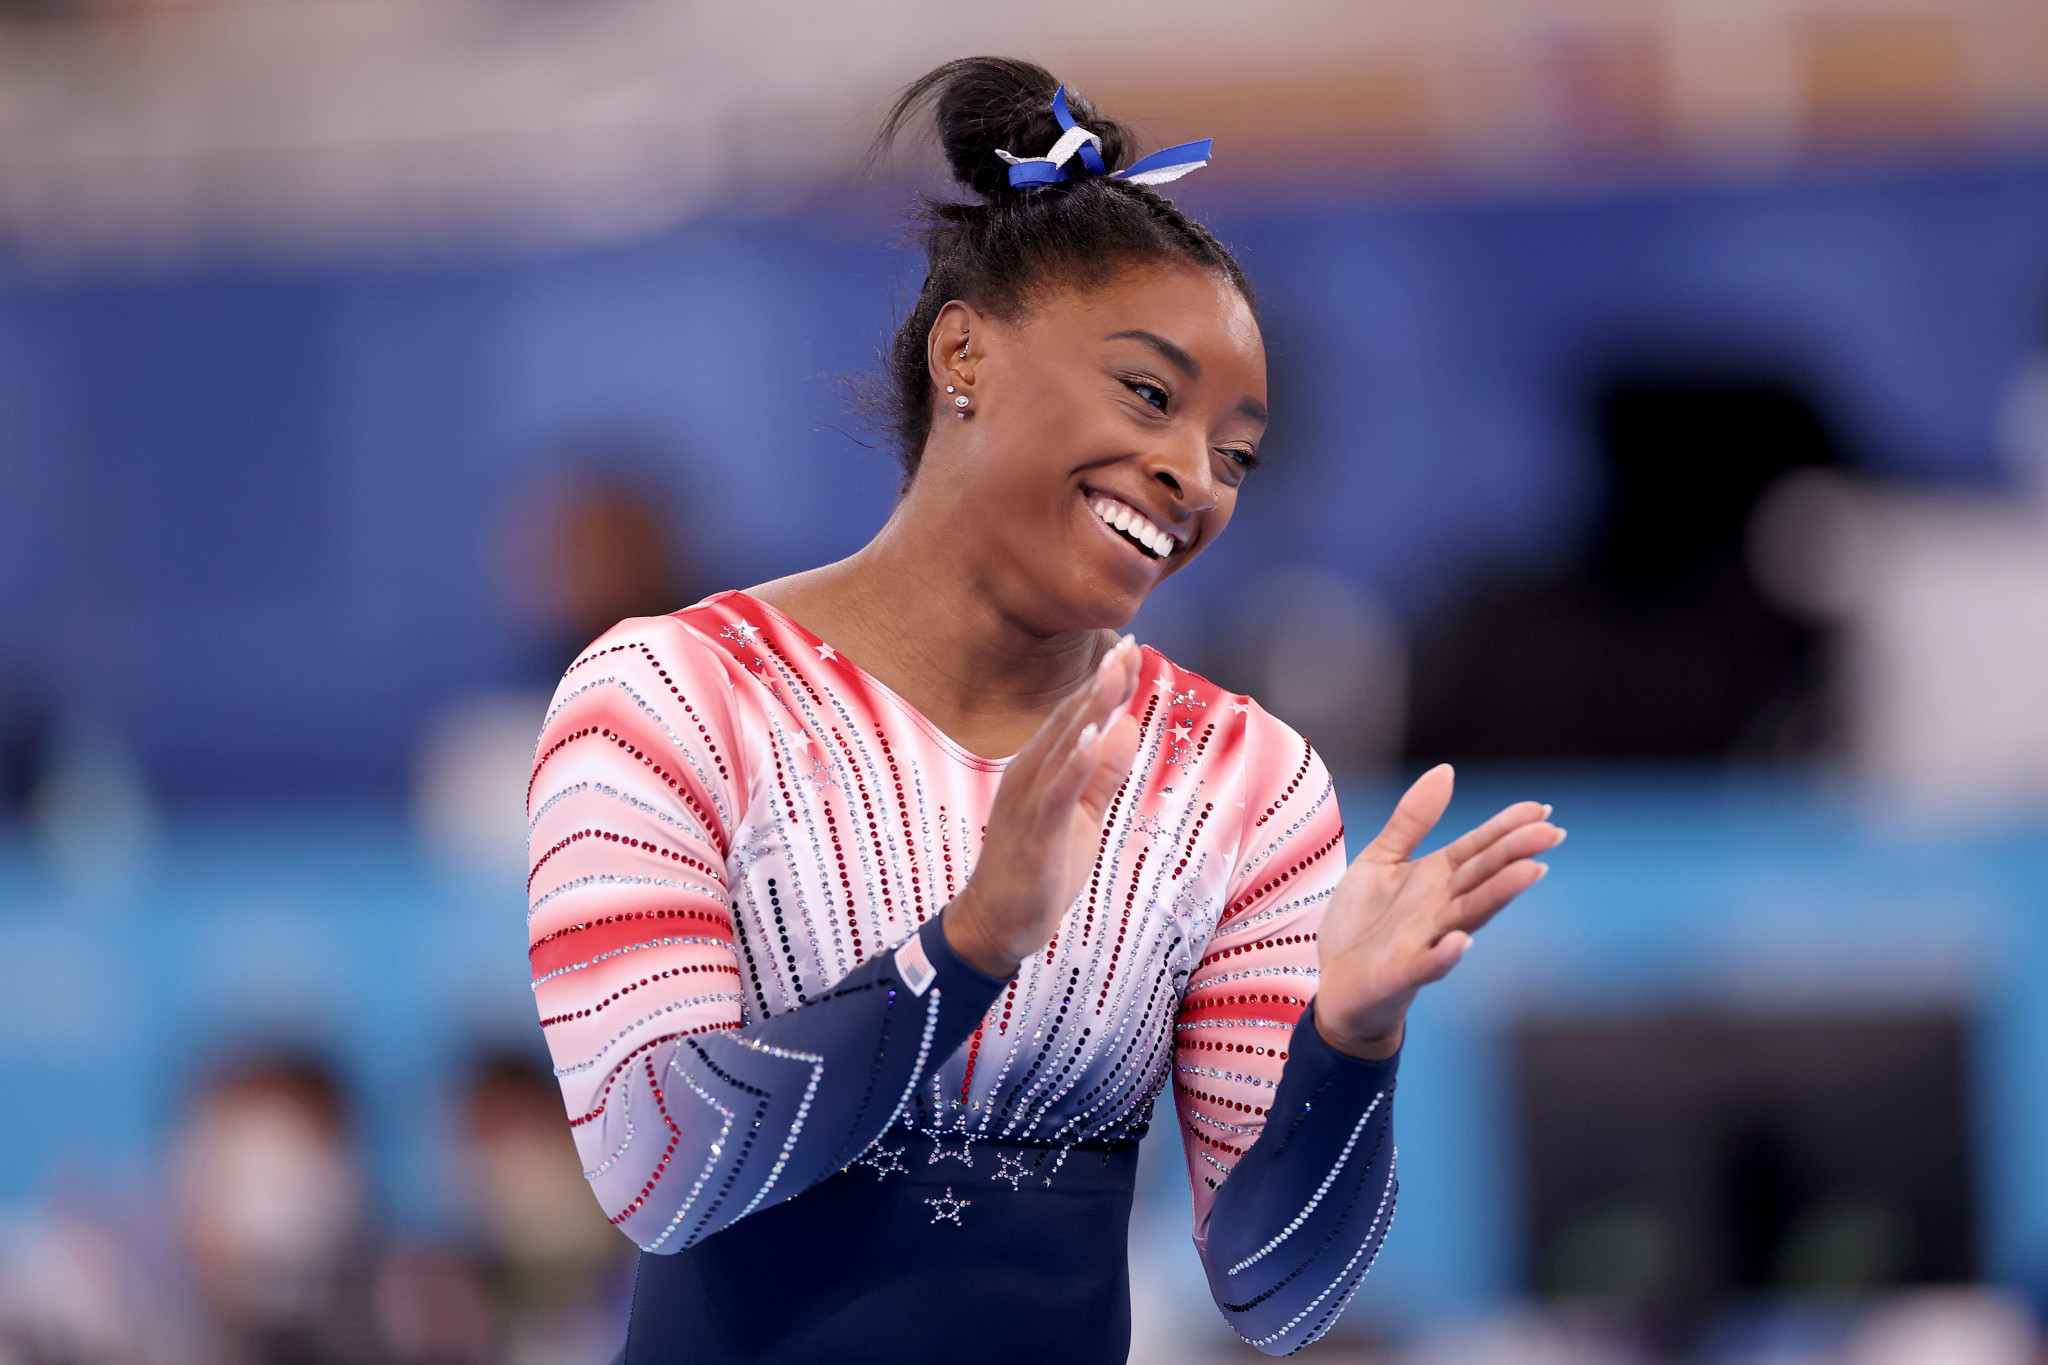 The US have won 37 artistic gymnastics golds at the Olympics, four of which were won by Simone Biles who revealed her plans to return to competition for the first time since Tokyo 2020 earlier this week ©Getty Images